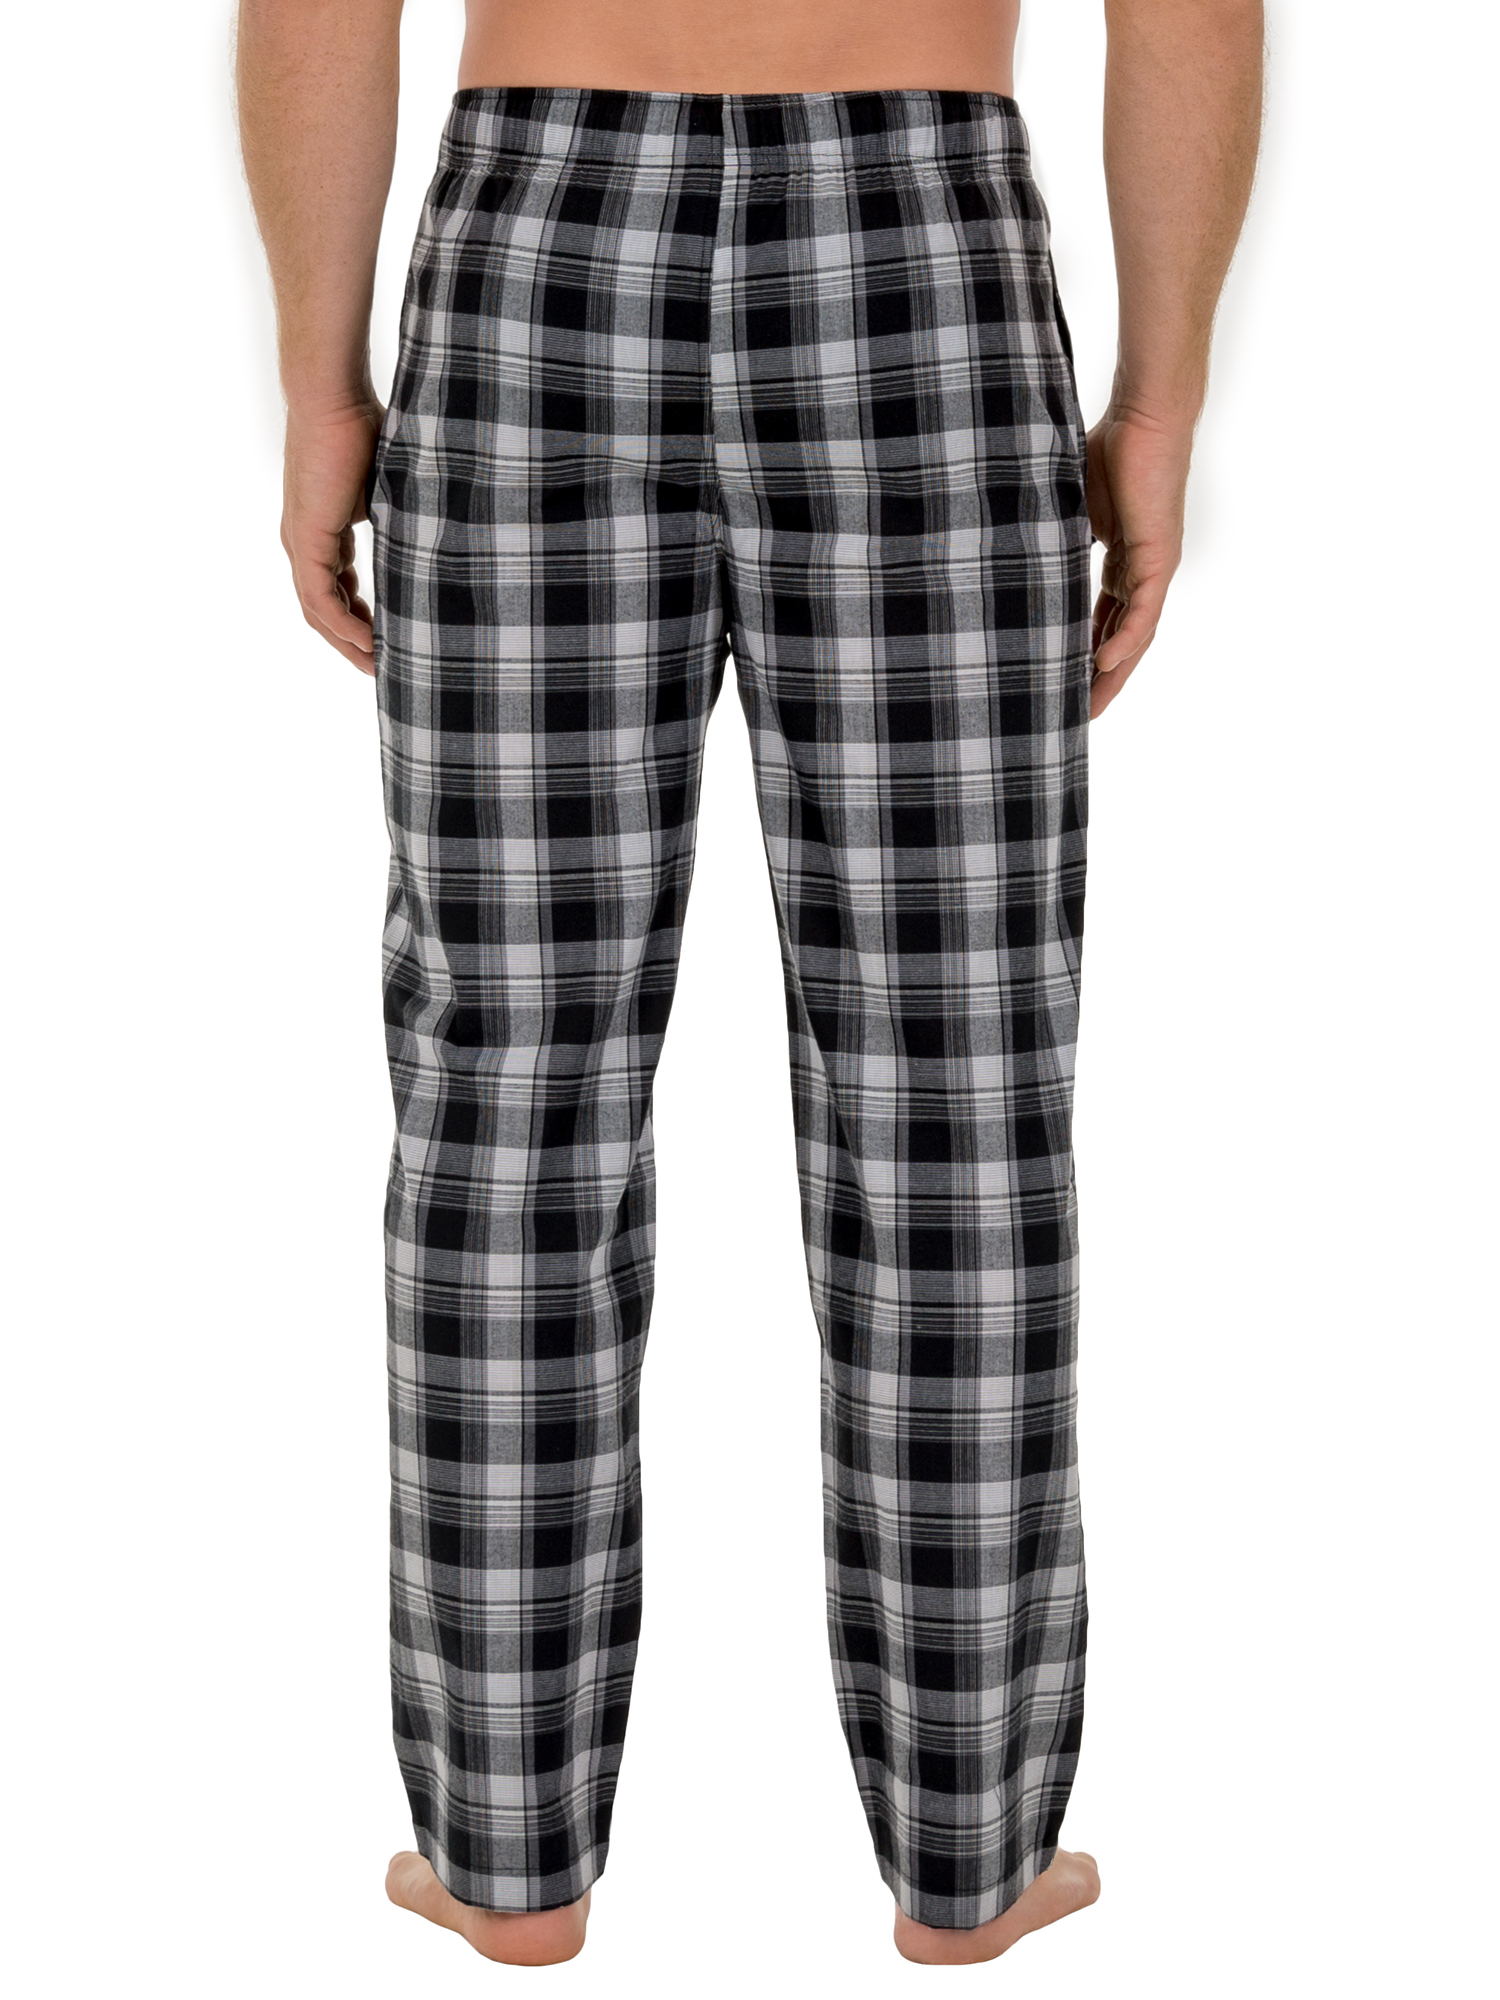 Fruit of the Loom Men's and Big Men's Microsanded Woven Plaid Pajama Pants, Sizes S-6XL & LT-3XLT - image 5 of 6